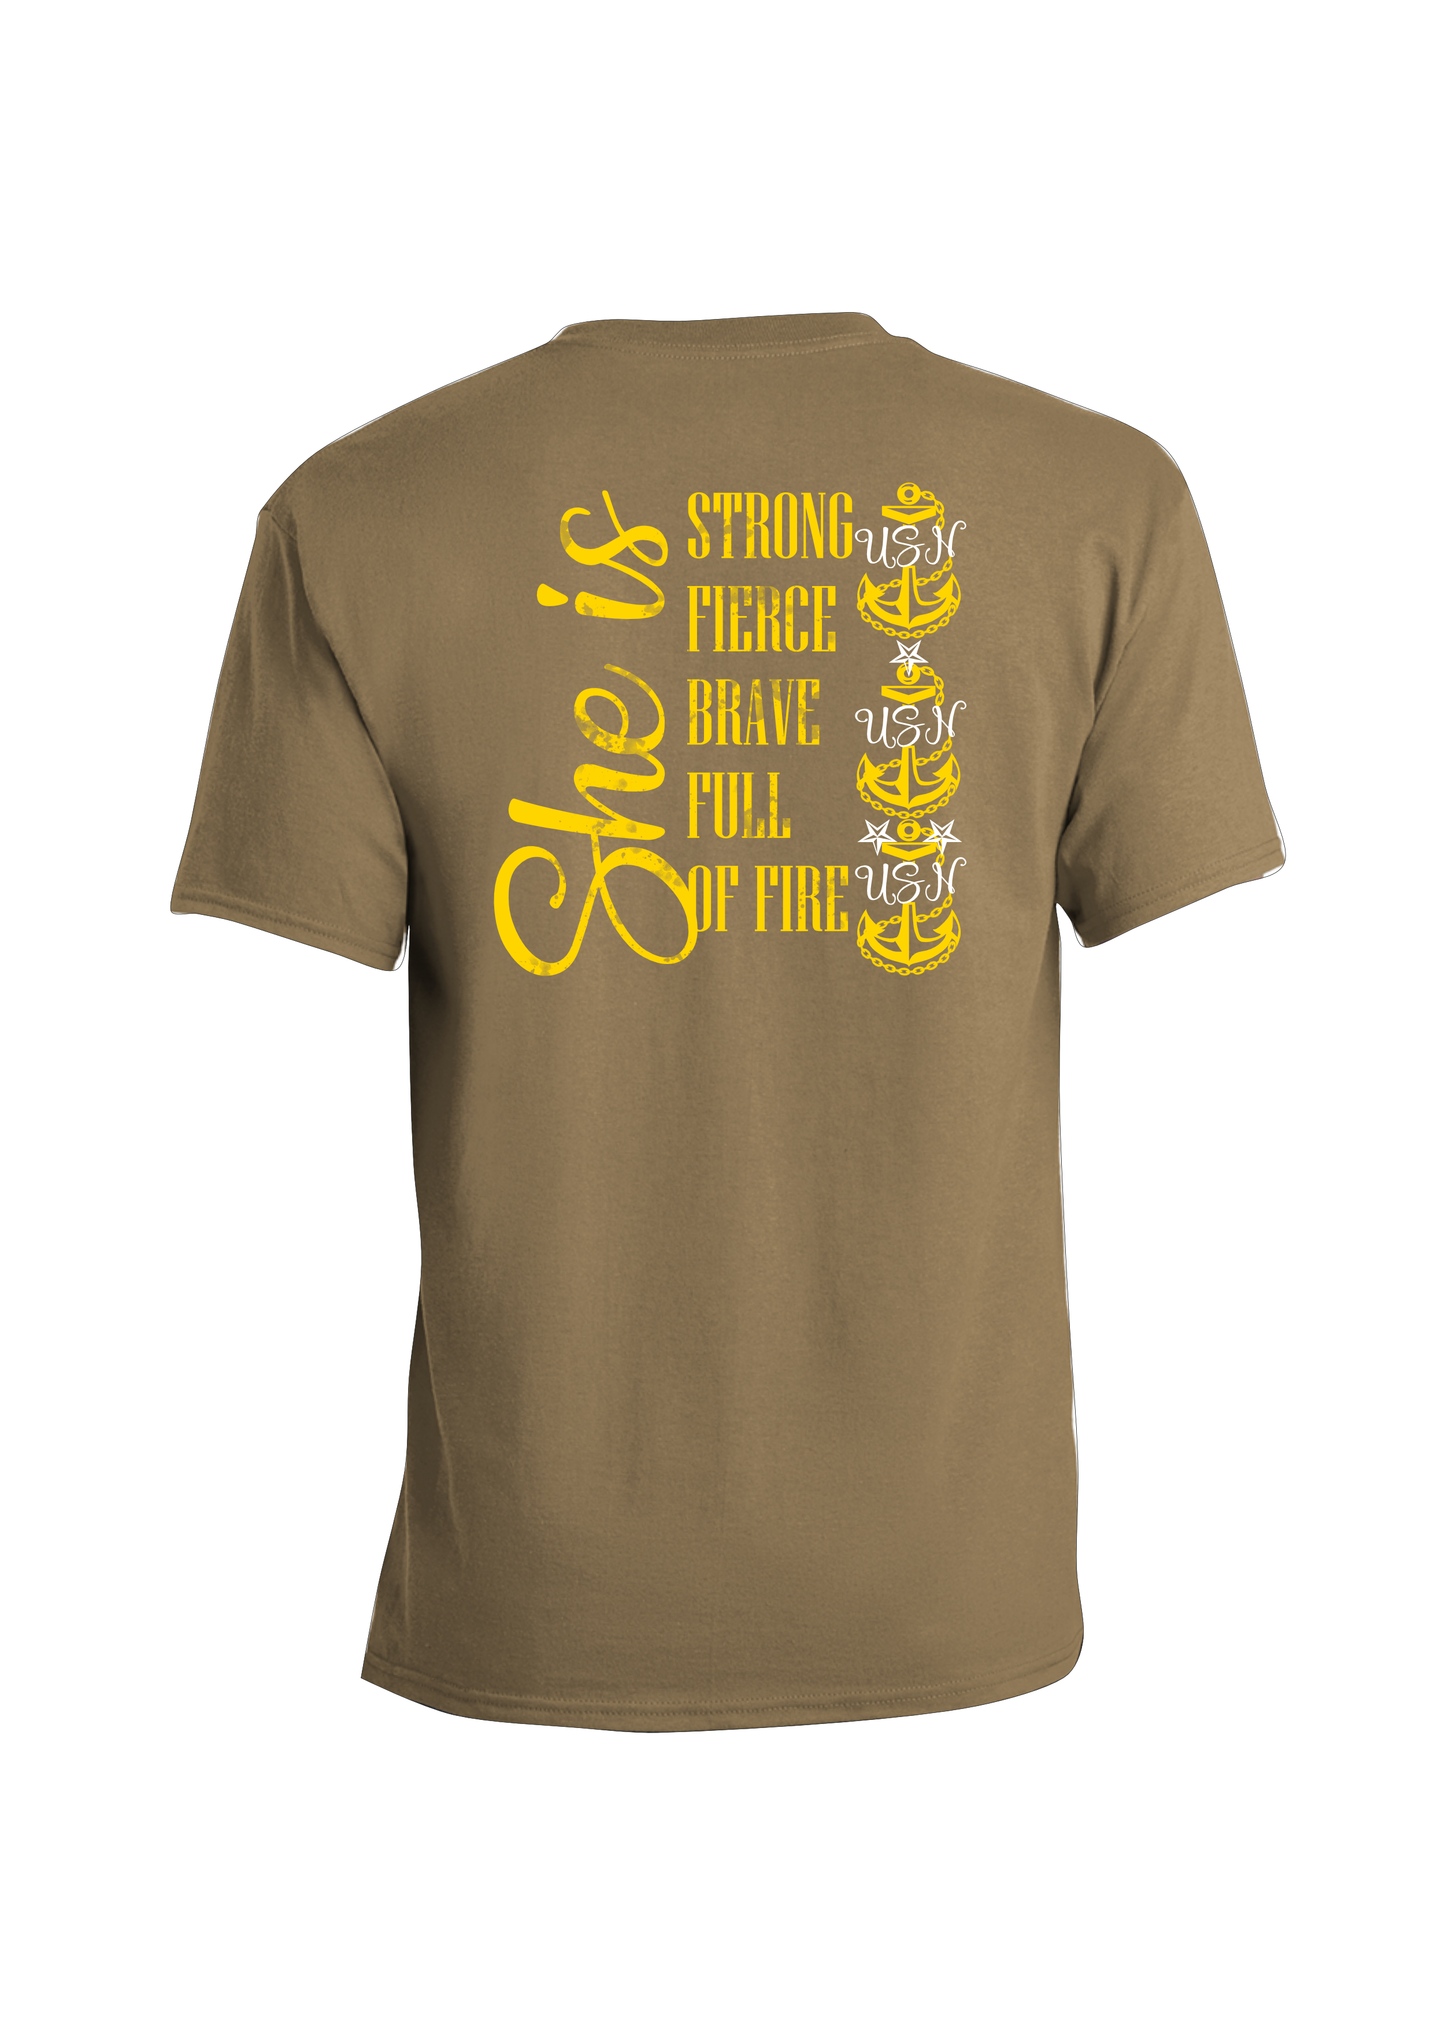 She is Trifecta Coyote Brown Chief Shirt